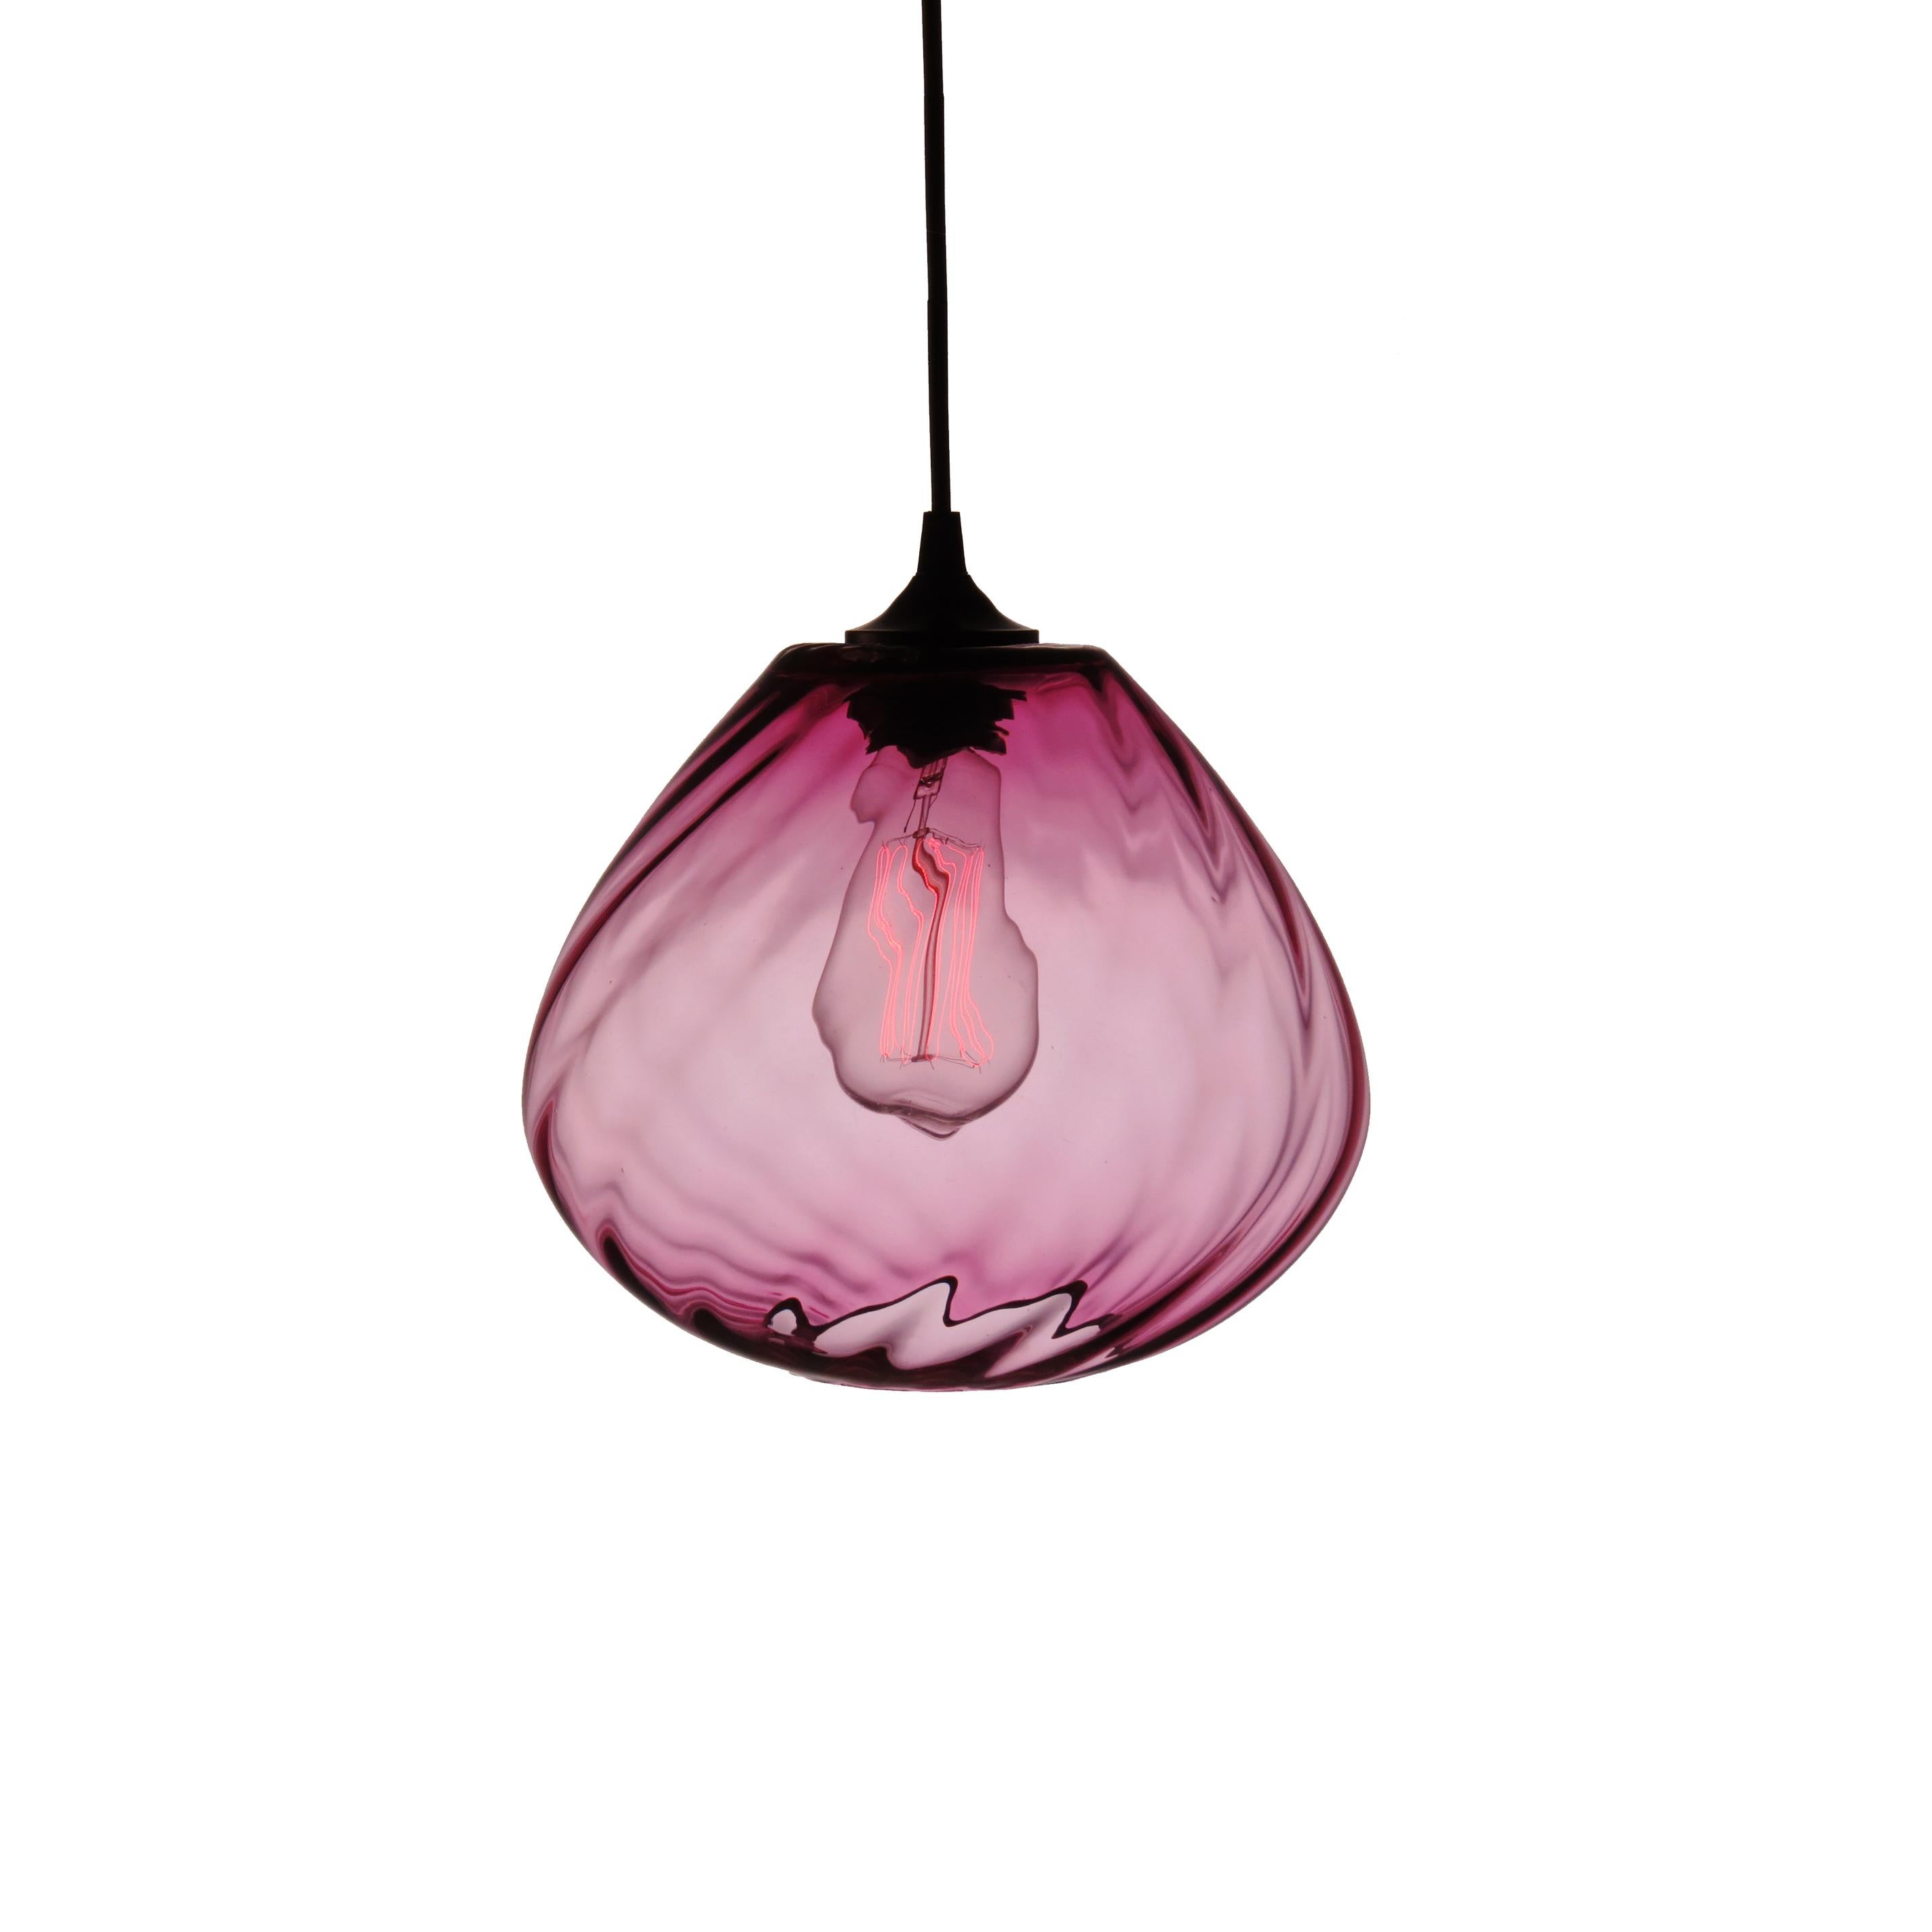 Golden Olive Modern Transparent Hand Blown Glass Architectural Pendant Lamp For Sale 1